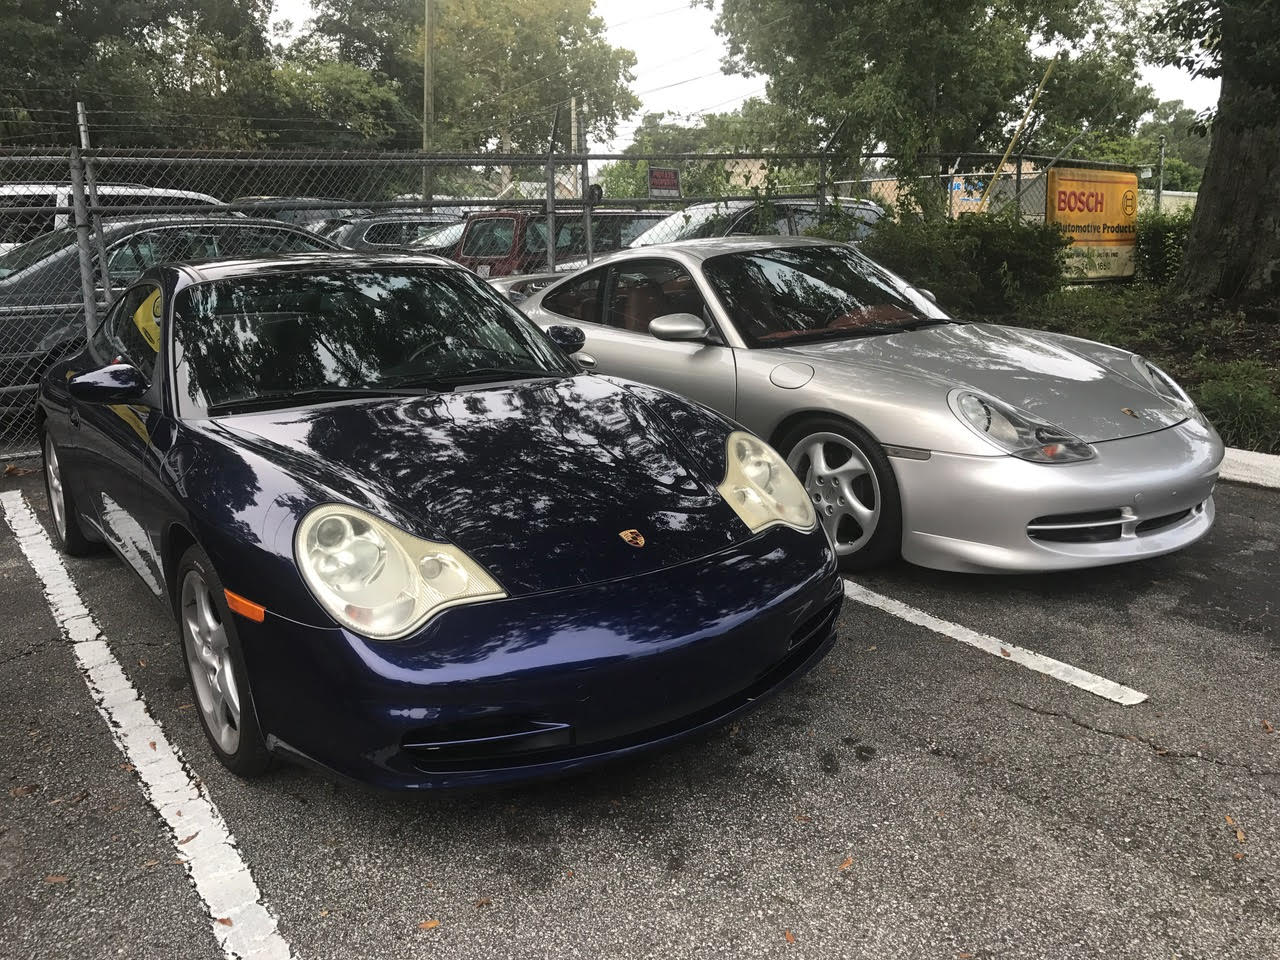 Navy Car and Silver Car in Parking Spot